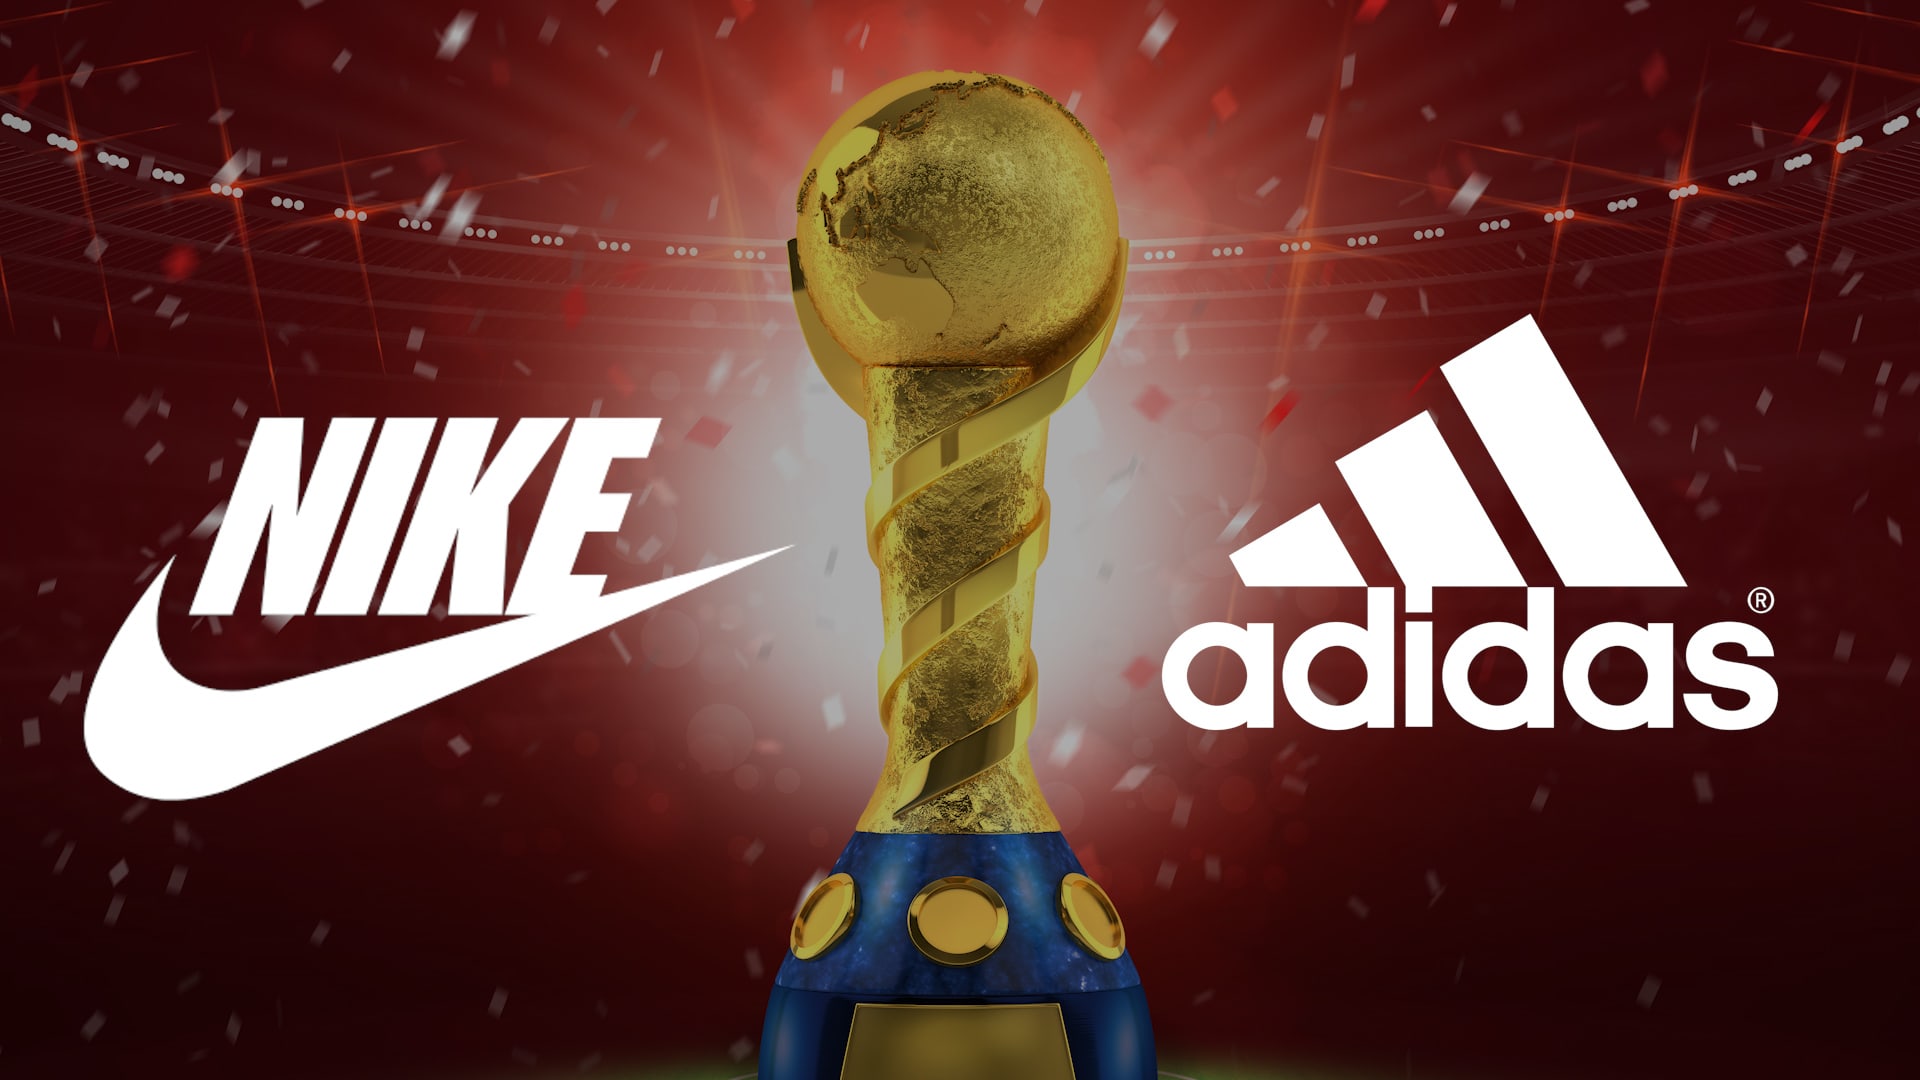 FIFA World Cup: Nike and Adidas face 